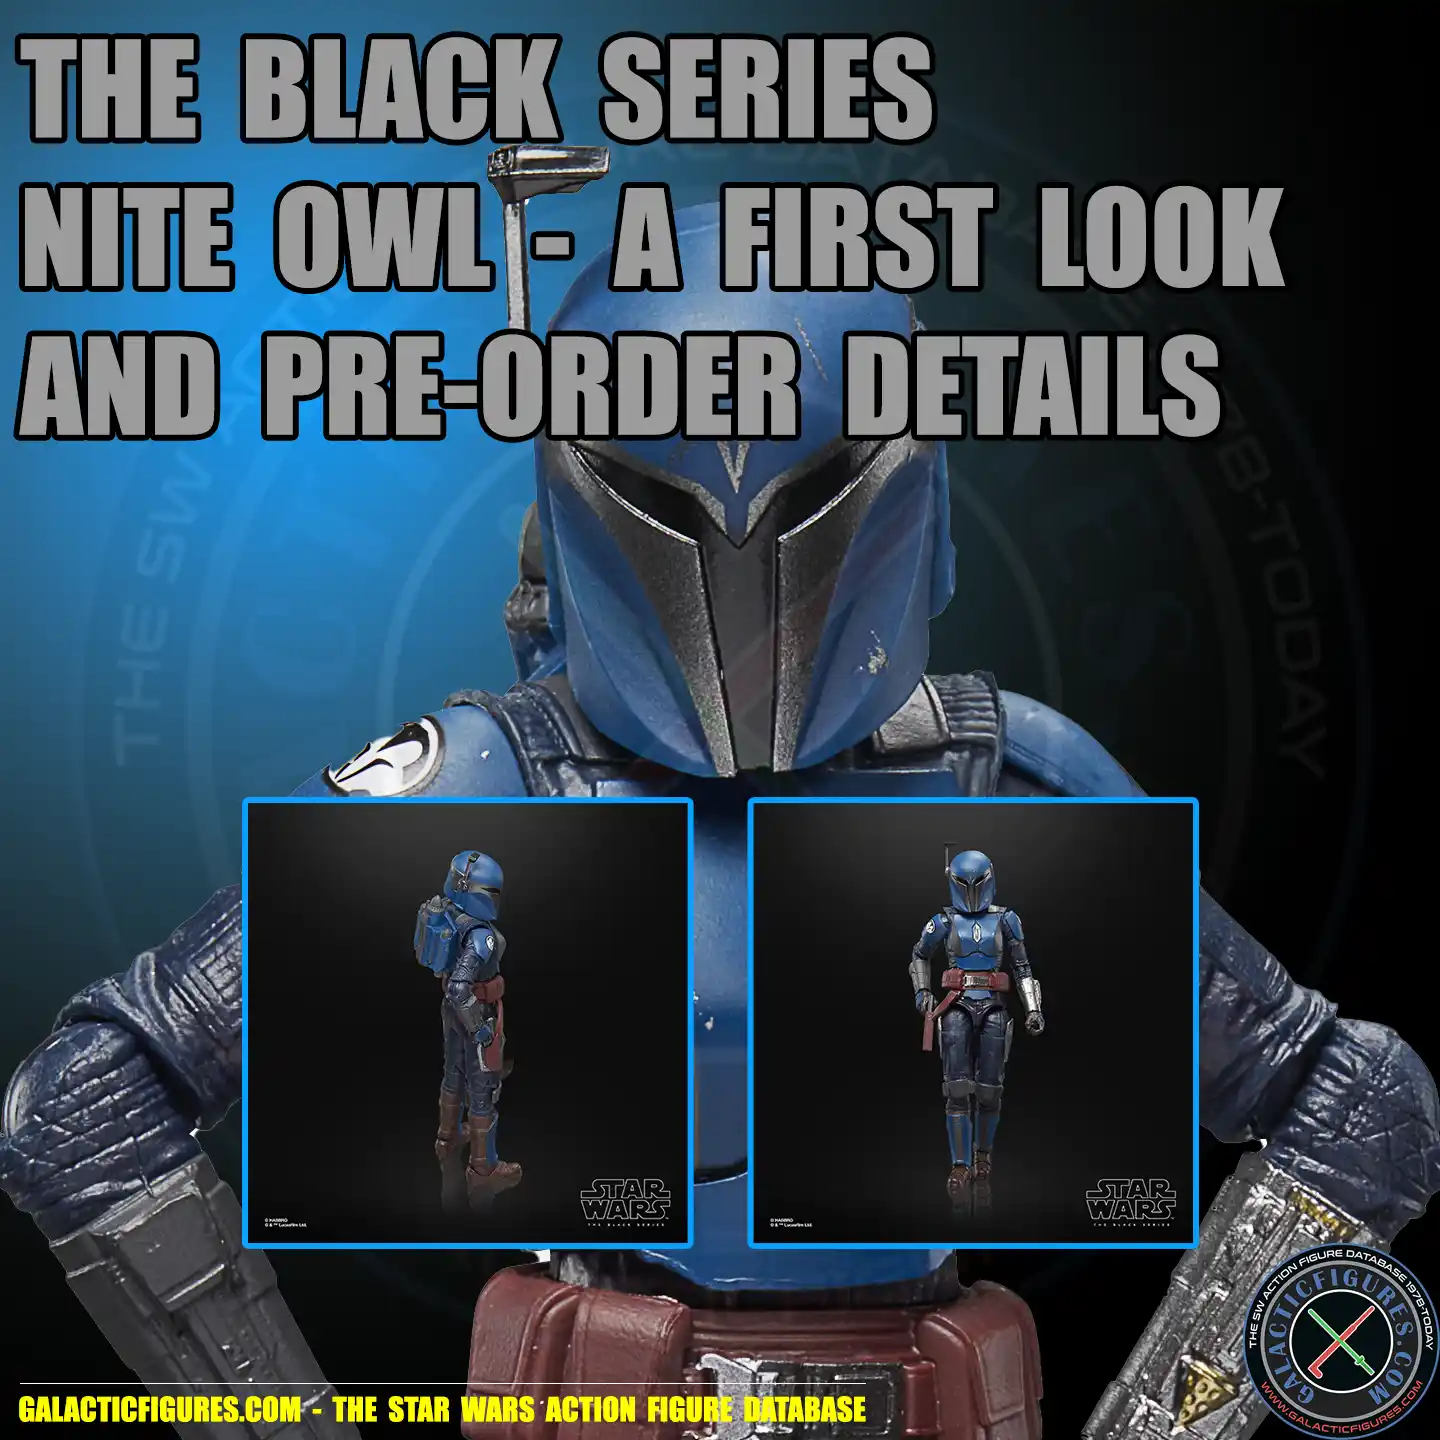 The Black Series Nite Owl - A First Look